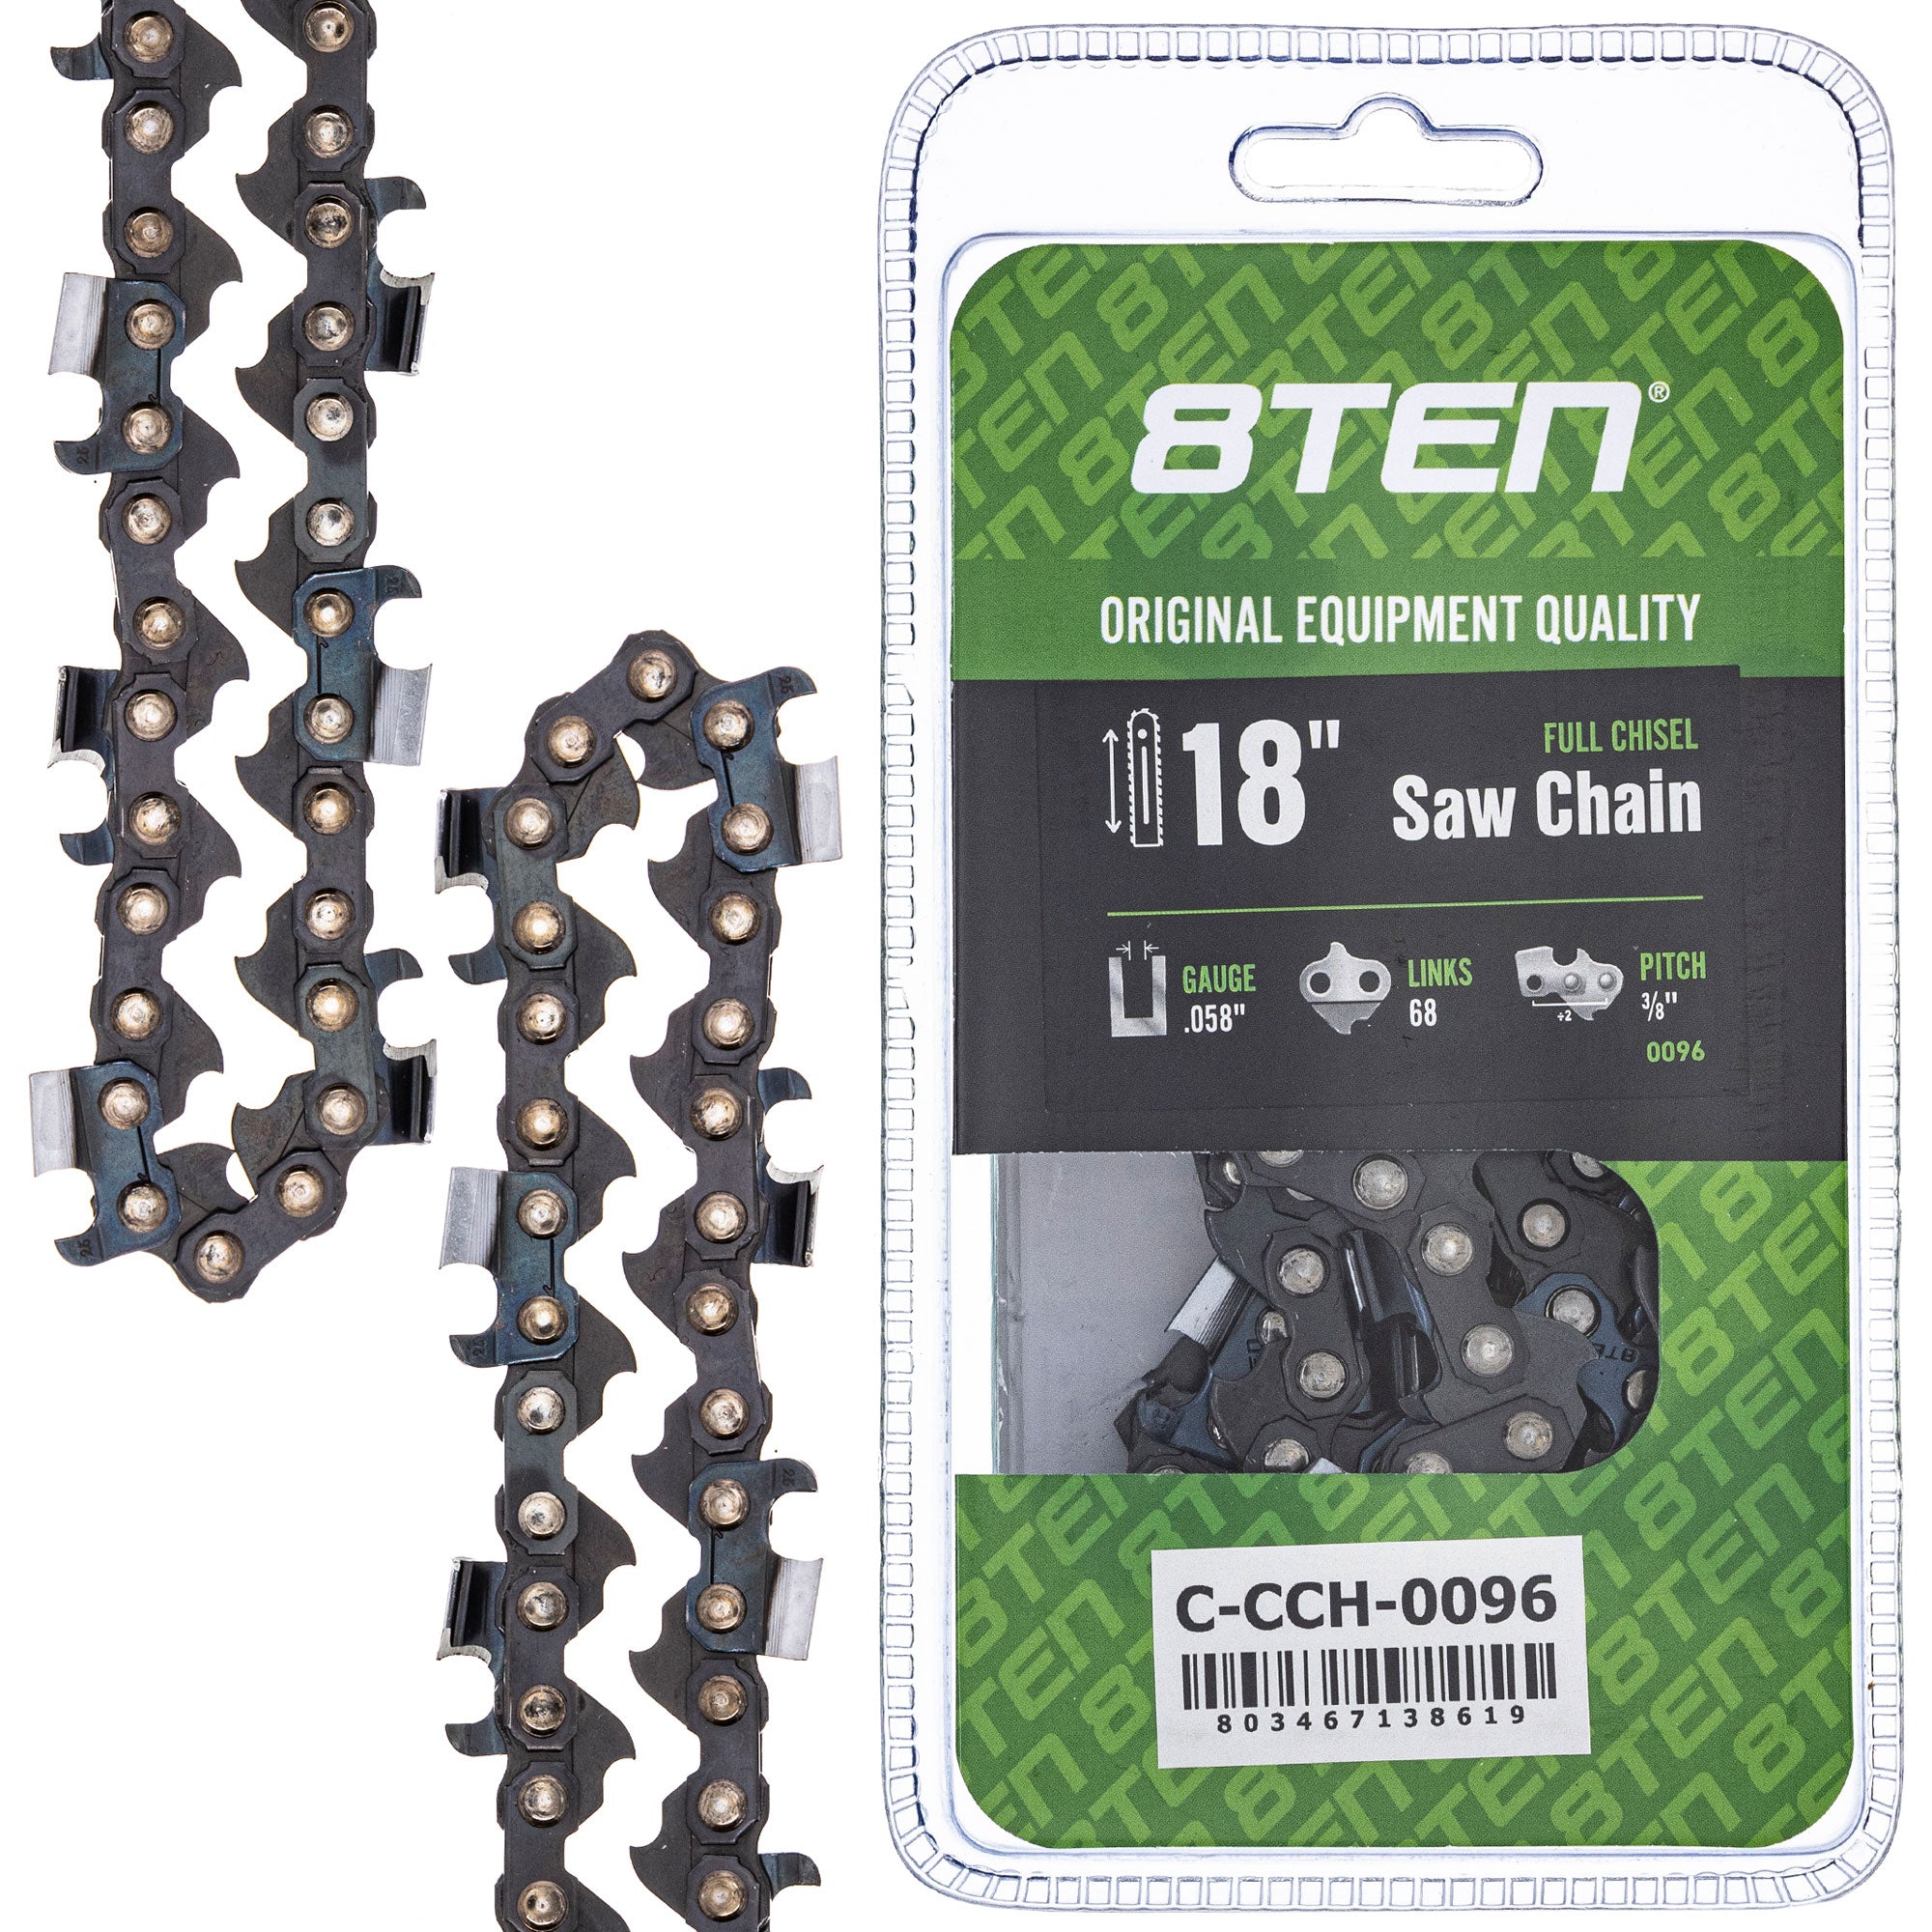 8TEN MK1010288 Guide Bar & Chain for S-65 S-55 S-50 R-440